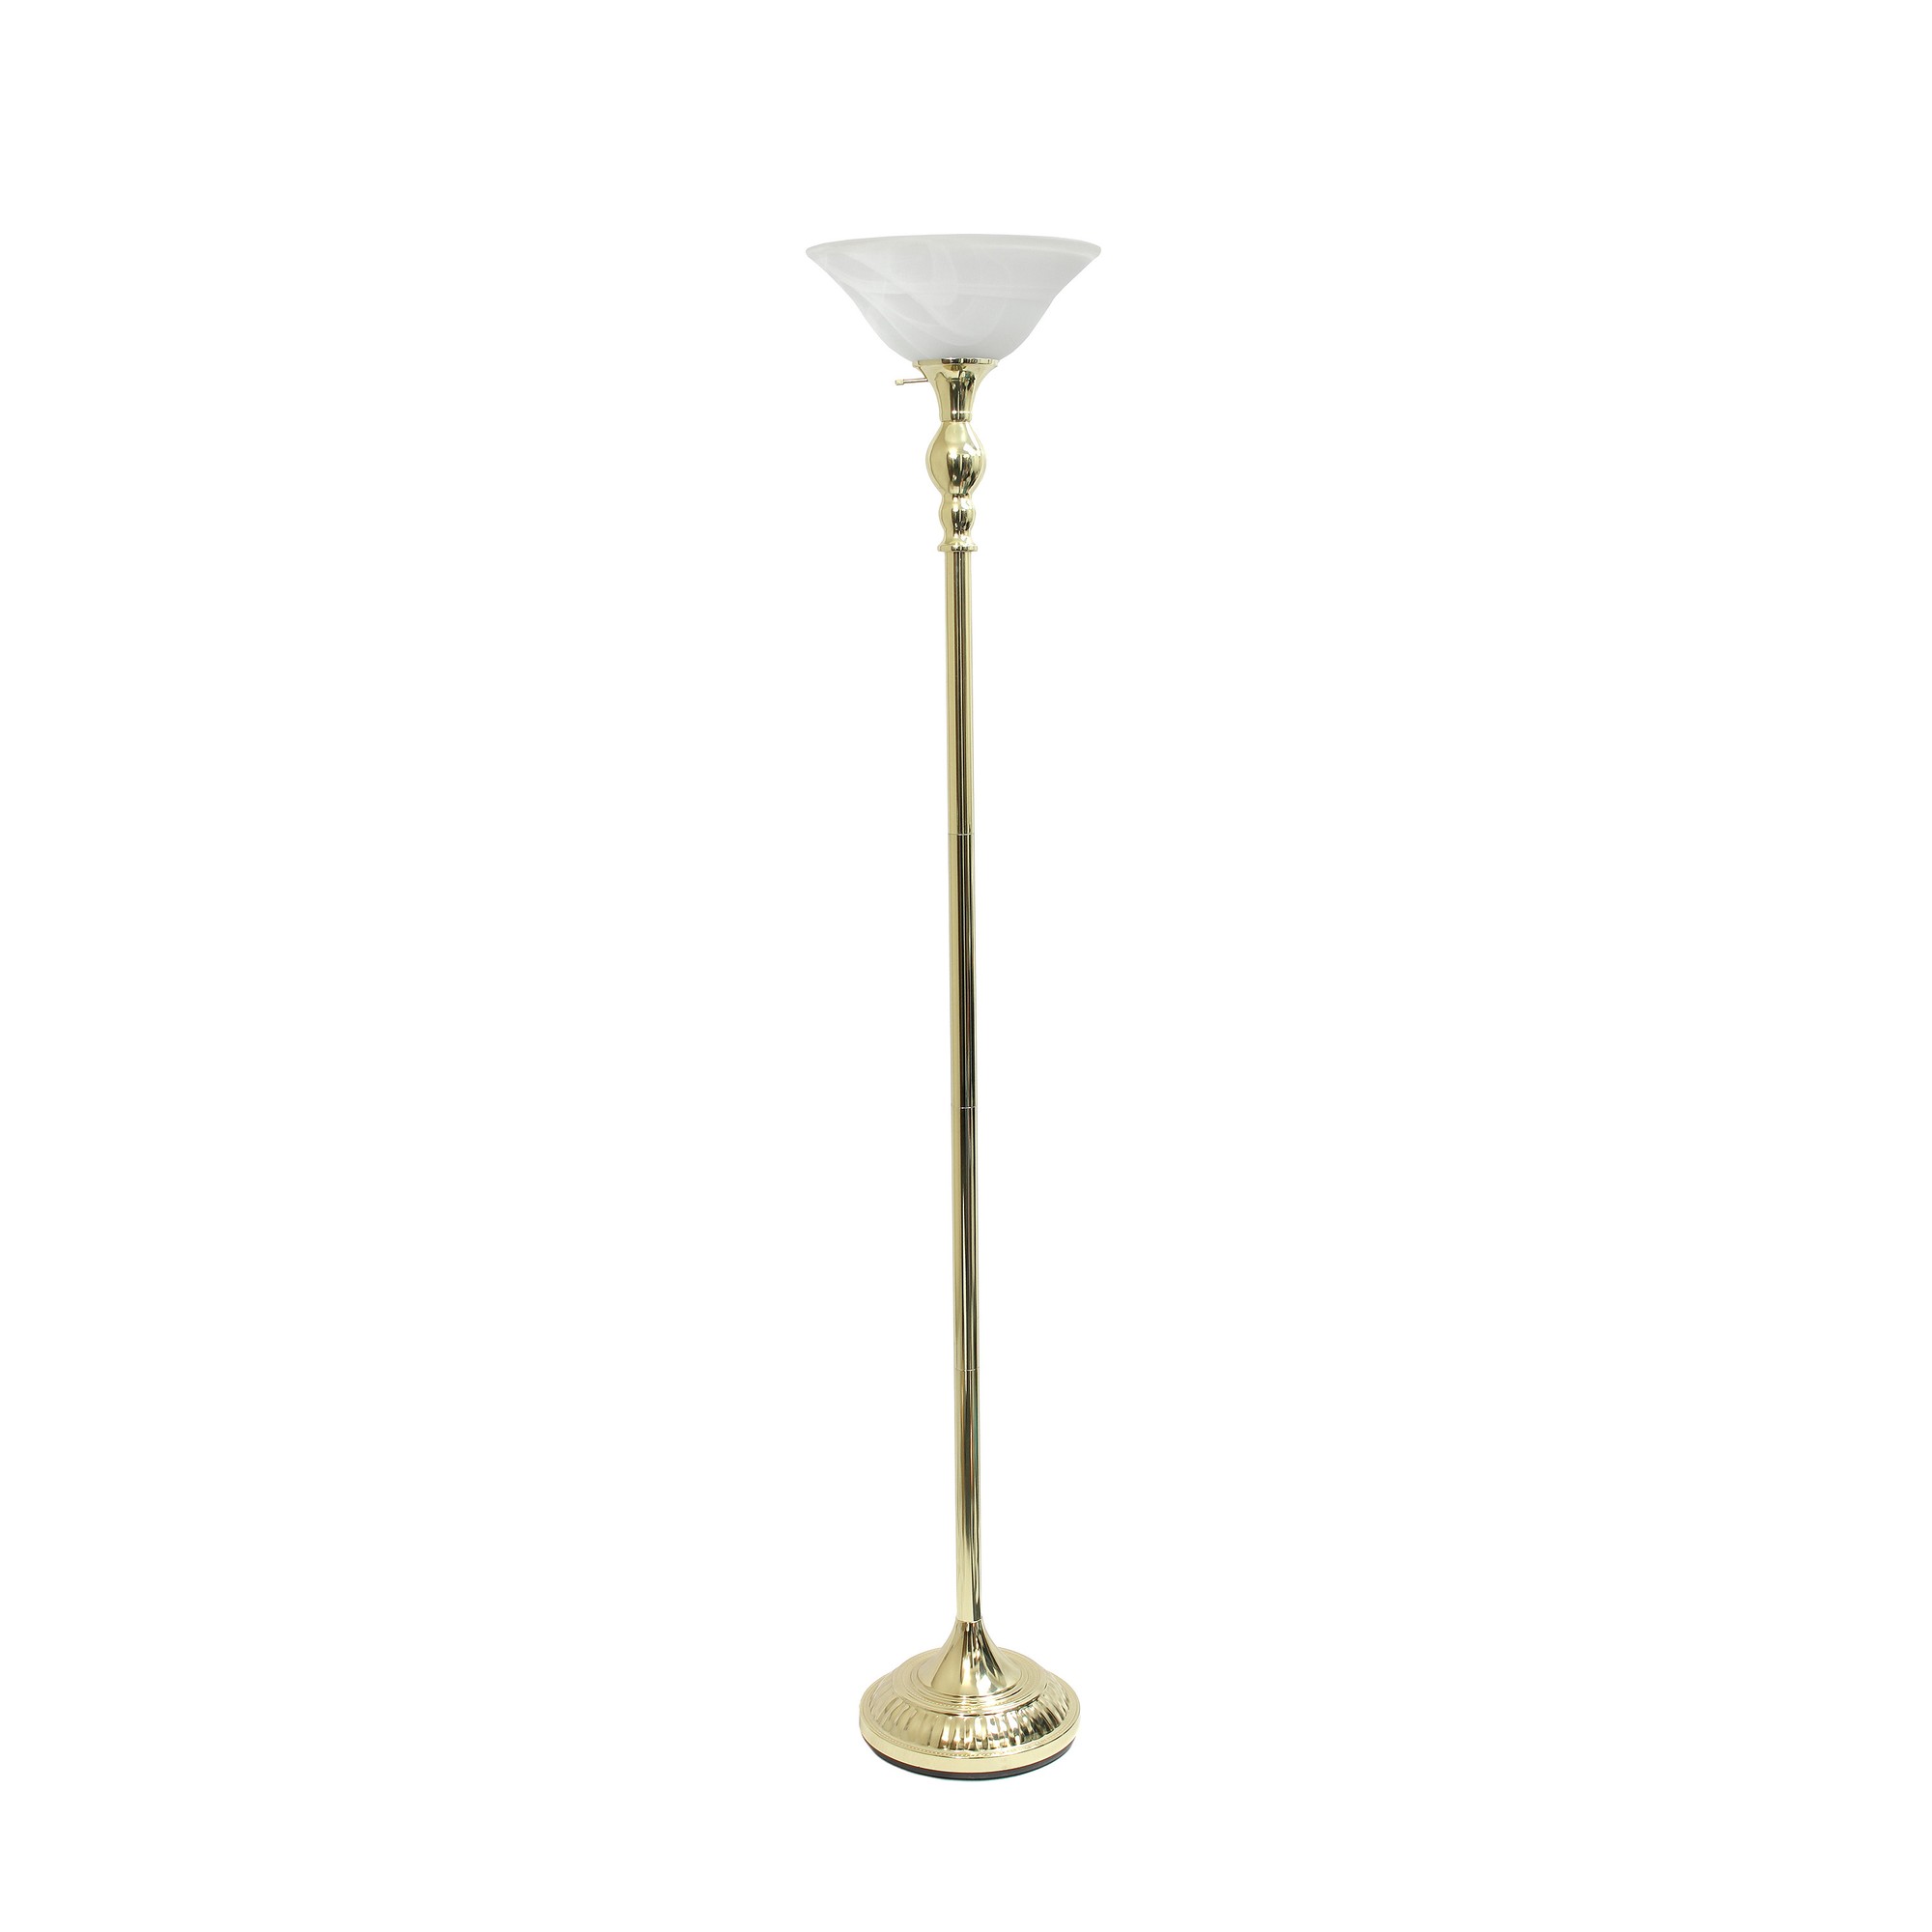 Elegant Designs 1 Light Torchiere Floor Lamp with Marbleized White Glass Shade, Gold